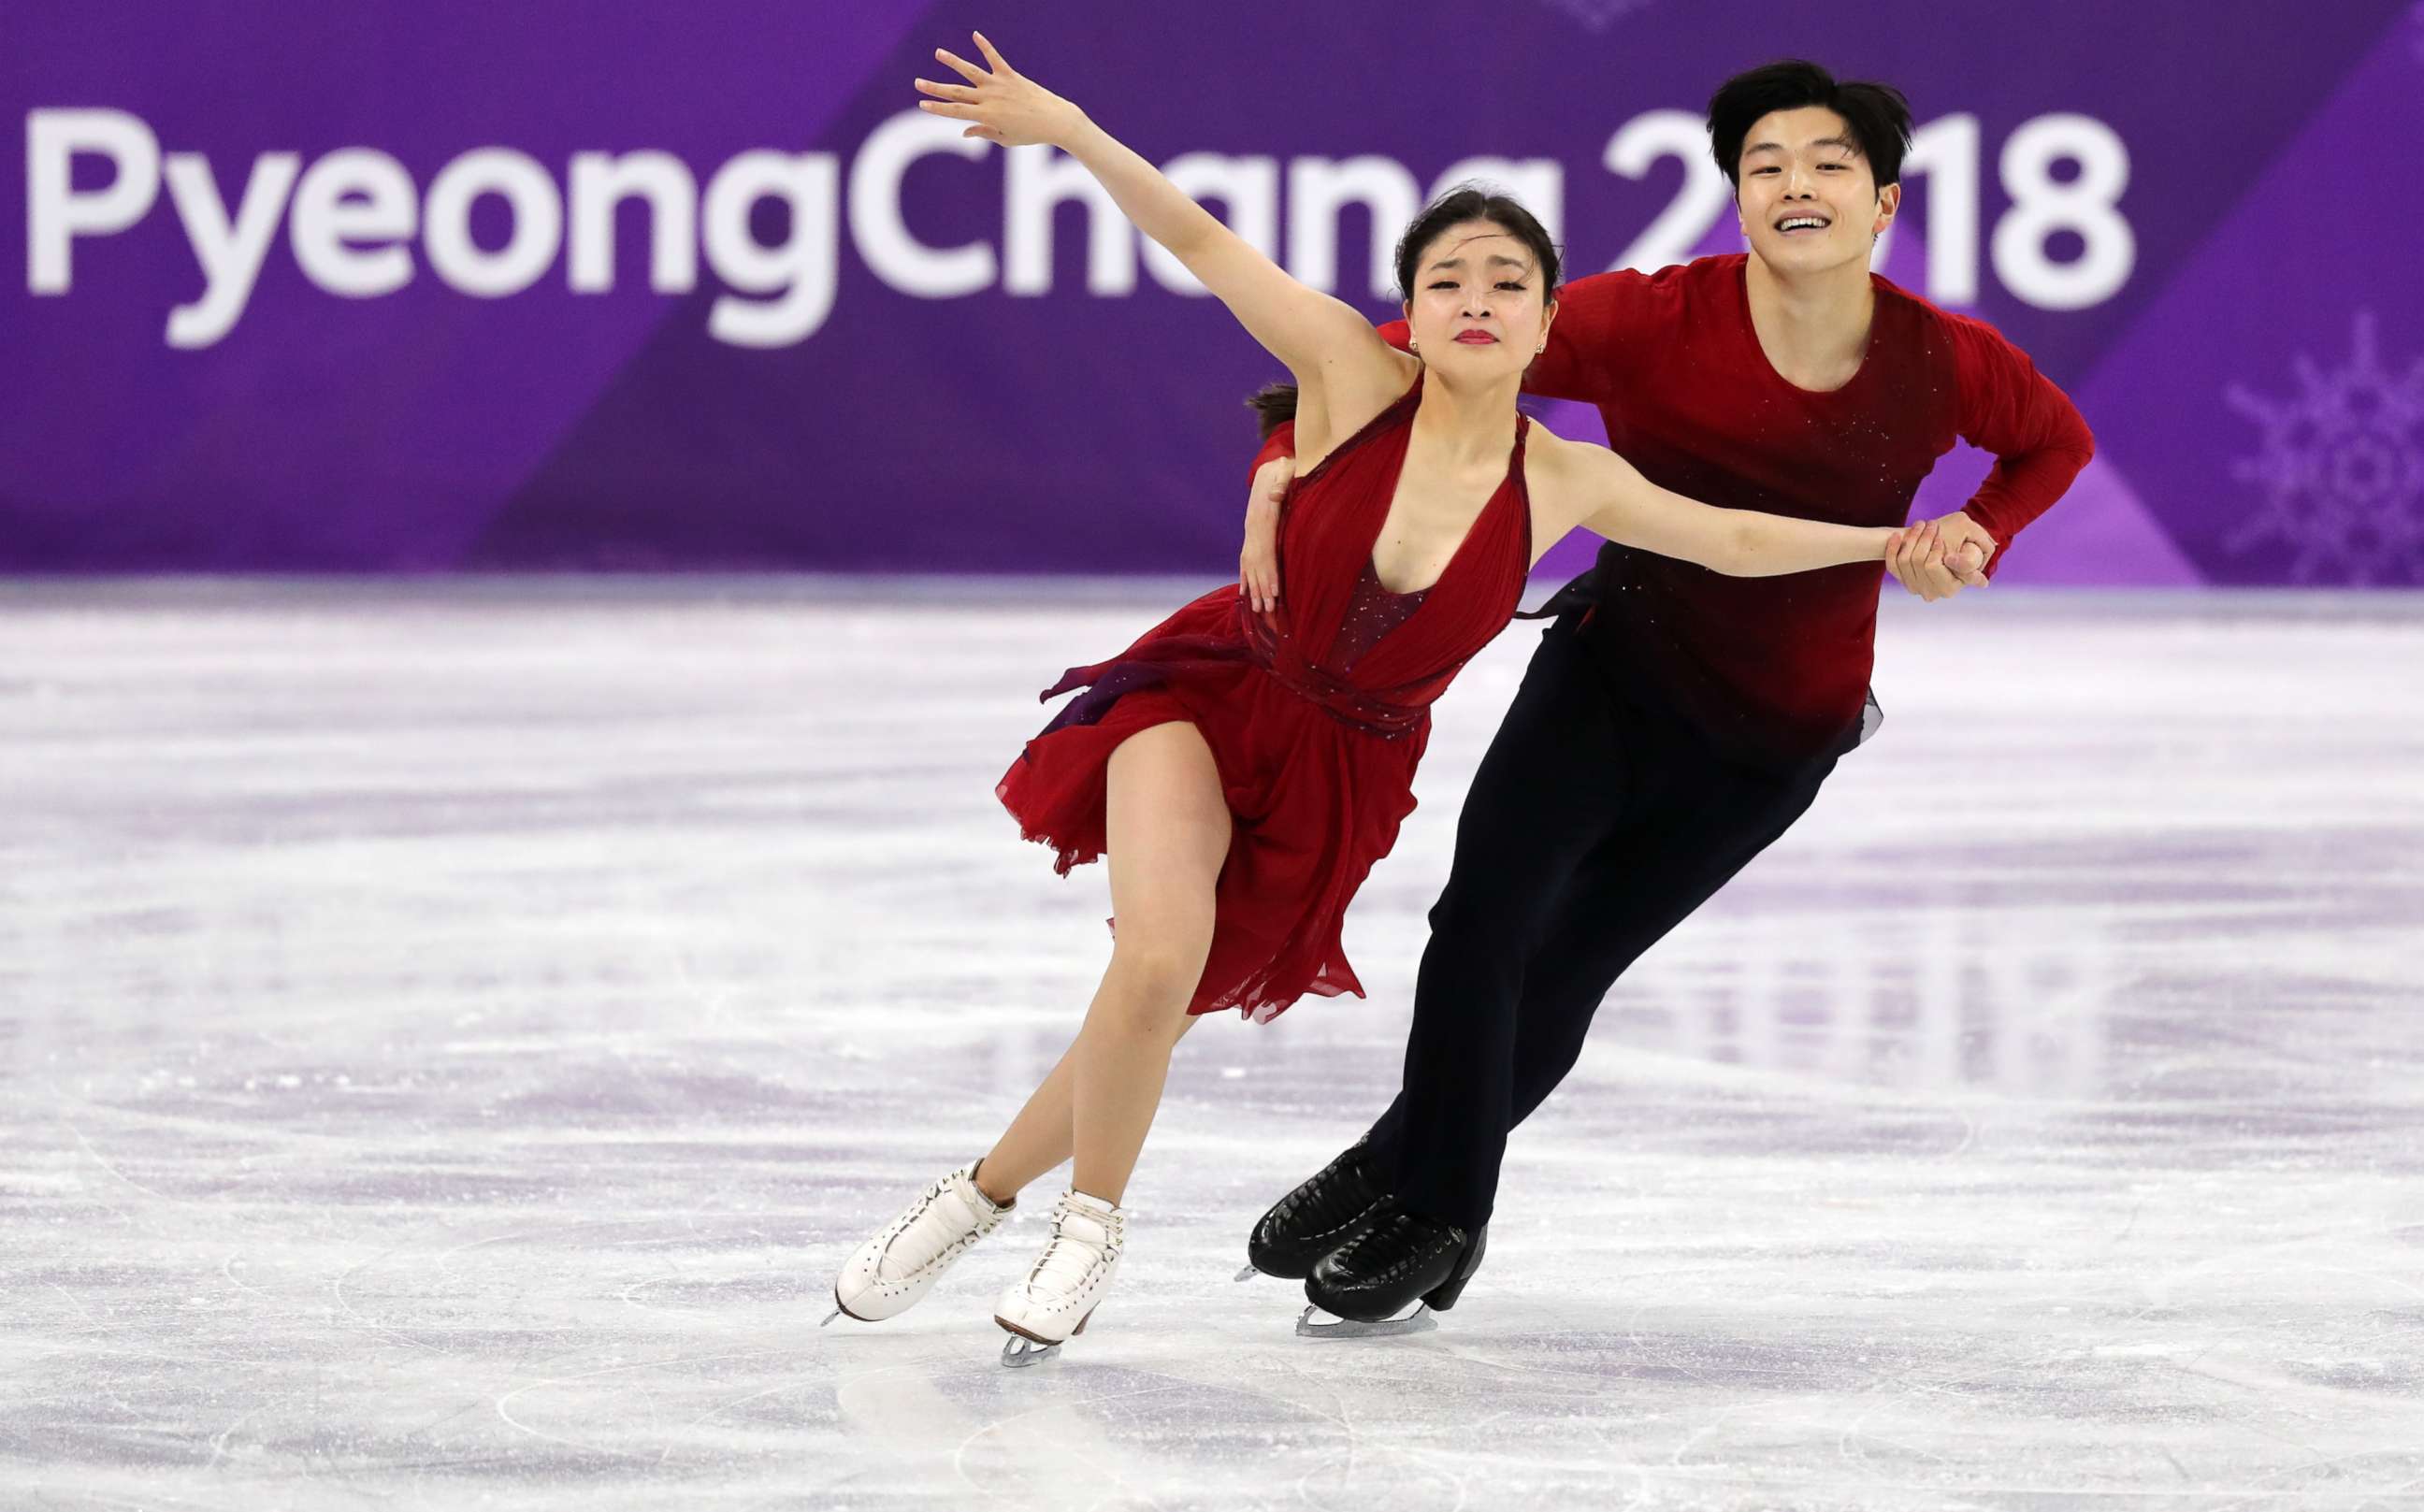 PHOTO: Americans Maia Shibutani and Alex Shibutani perform in the figure skating free dance event during the Pyeongchang 2018 Olympic Winter Games at Gangneung Ice Arena, Pyeongchang, South Korea, Feb. 20, 2018.